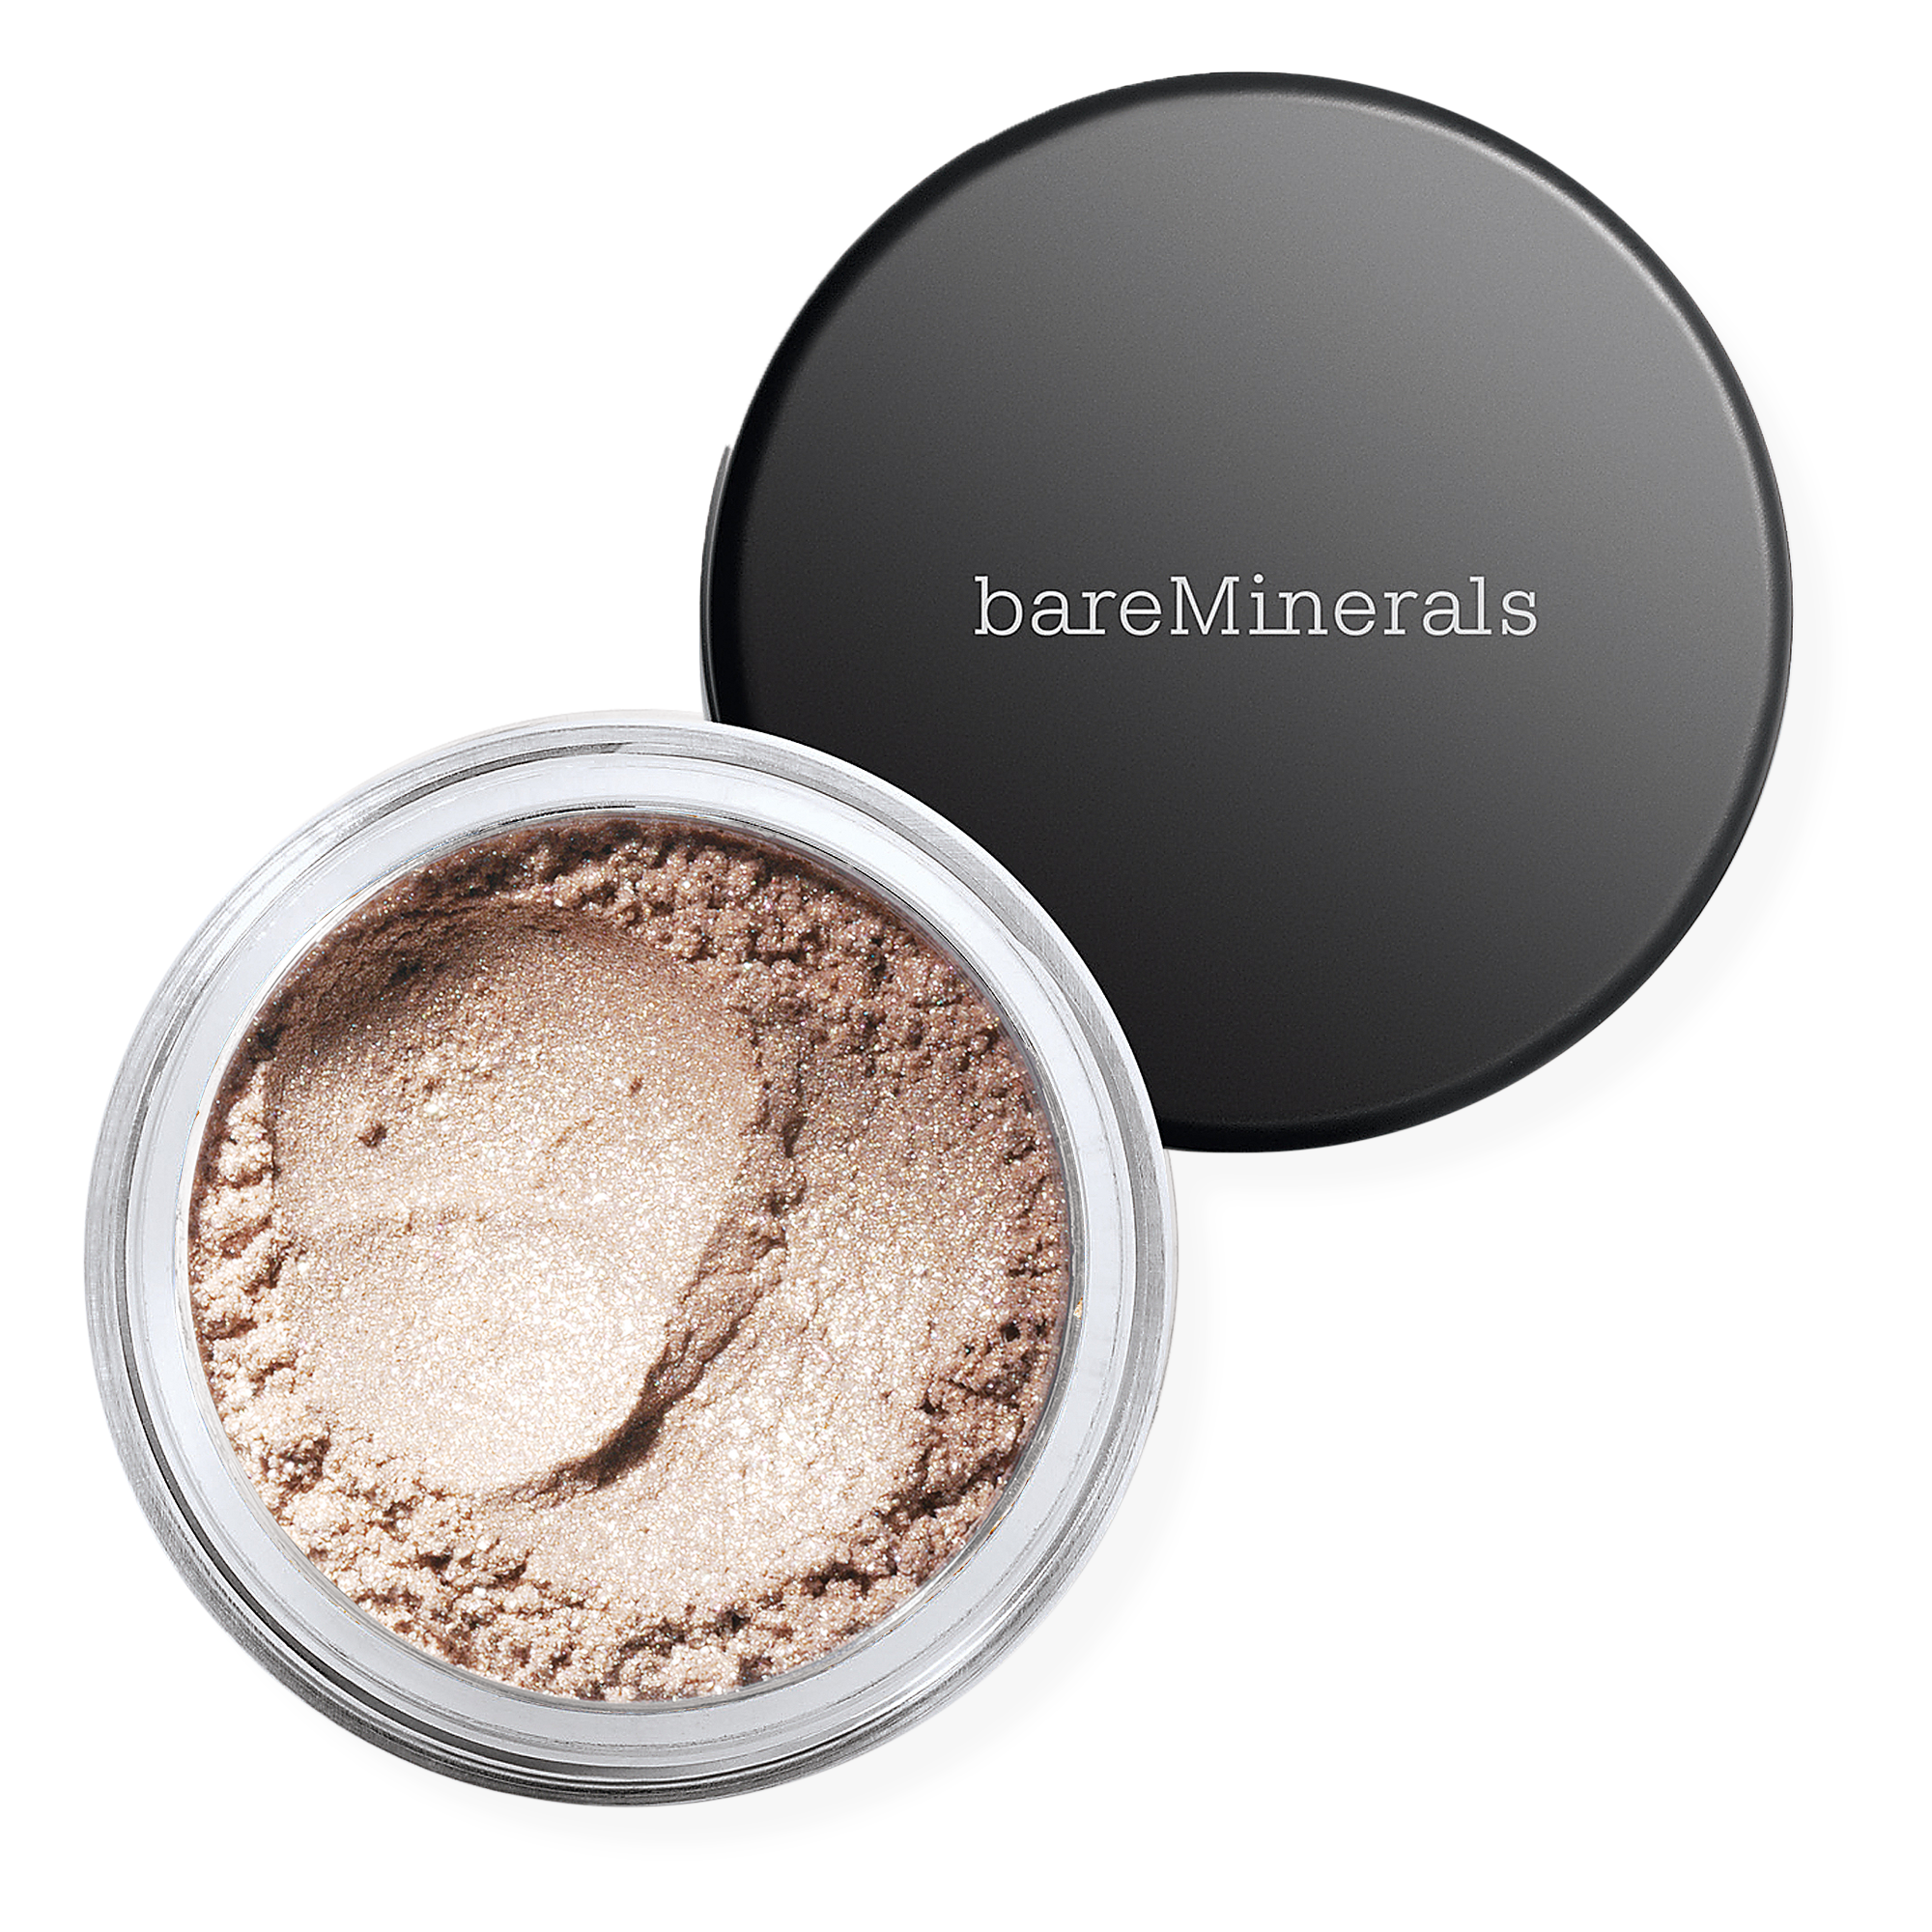 bareMinerals Loose Mineral Eyecolor / NUDE BEACH